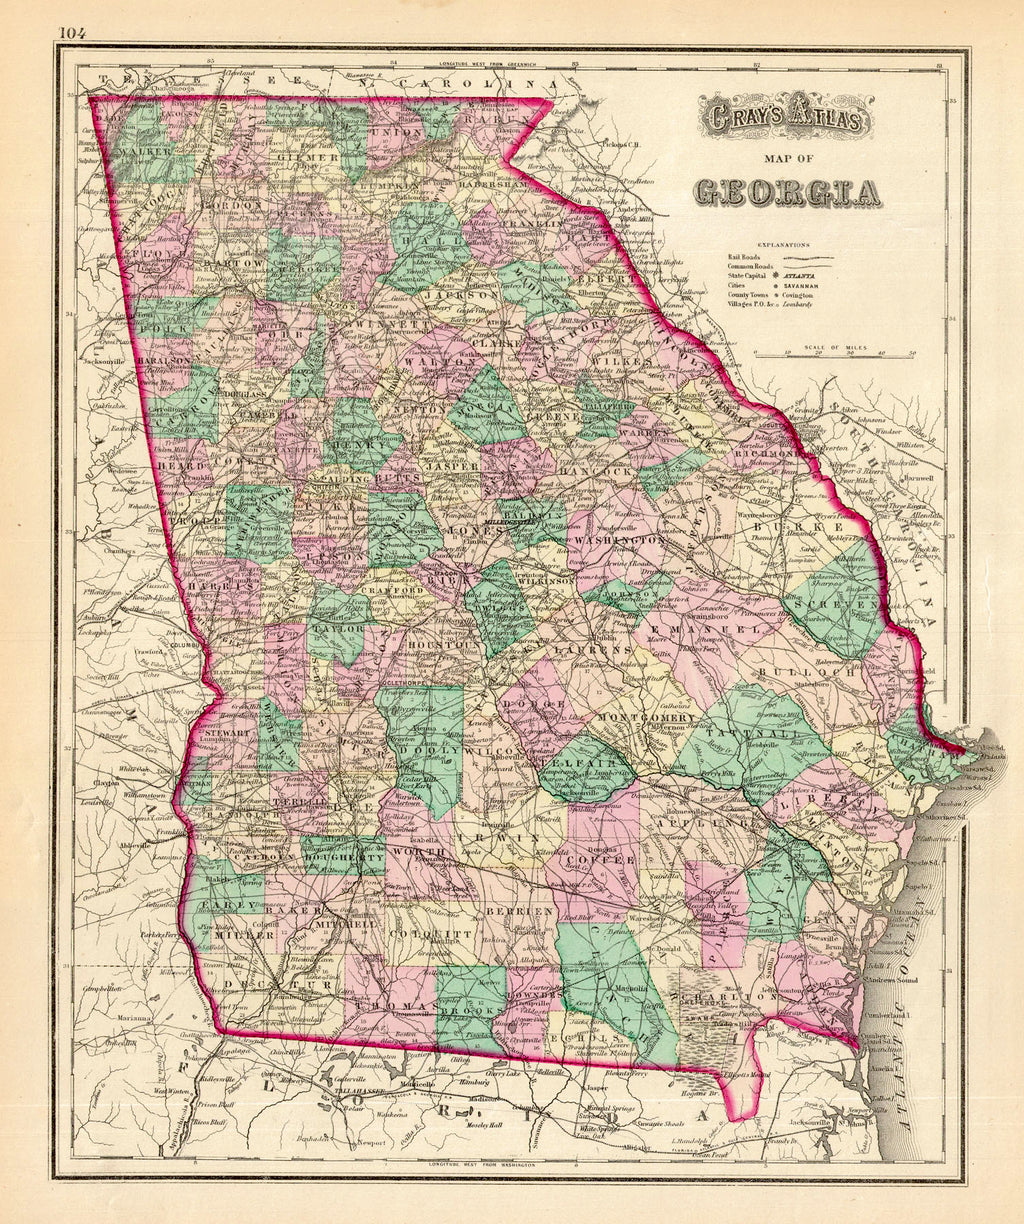 Map of Georgia Gray, 1874 Just a decade after the Civil War and here the reconstructing Georgia is regaining momentum. Hand colored by county and dense with notations for towns and railroads. Condition is very good. Image size is approximately 15 x 12.5 (inches)